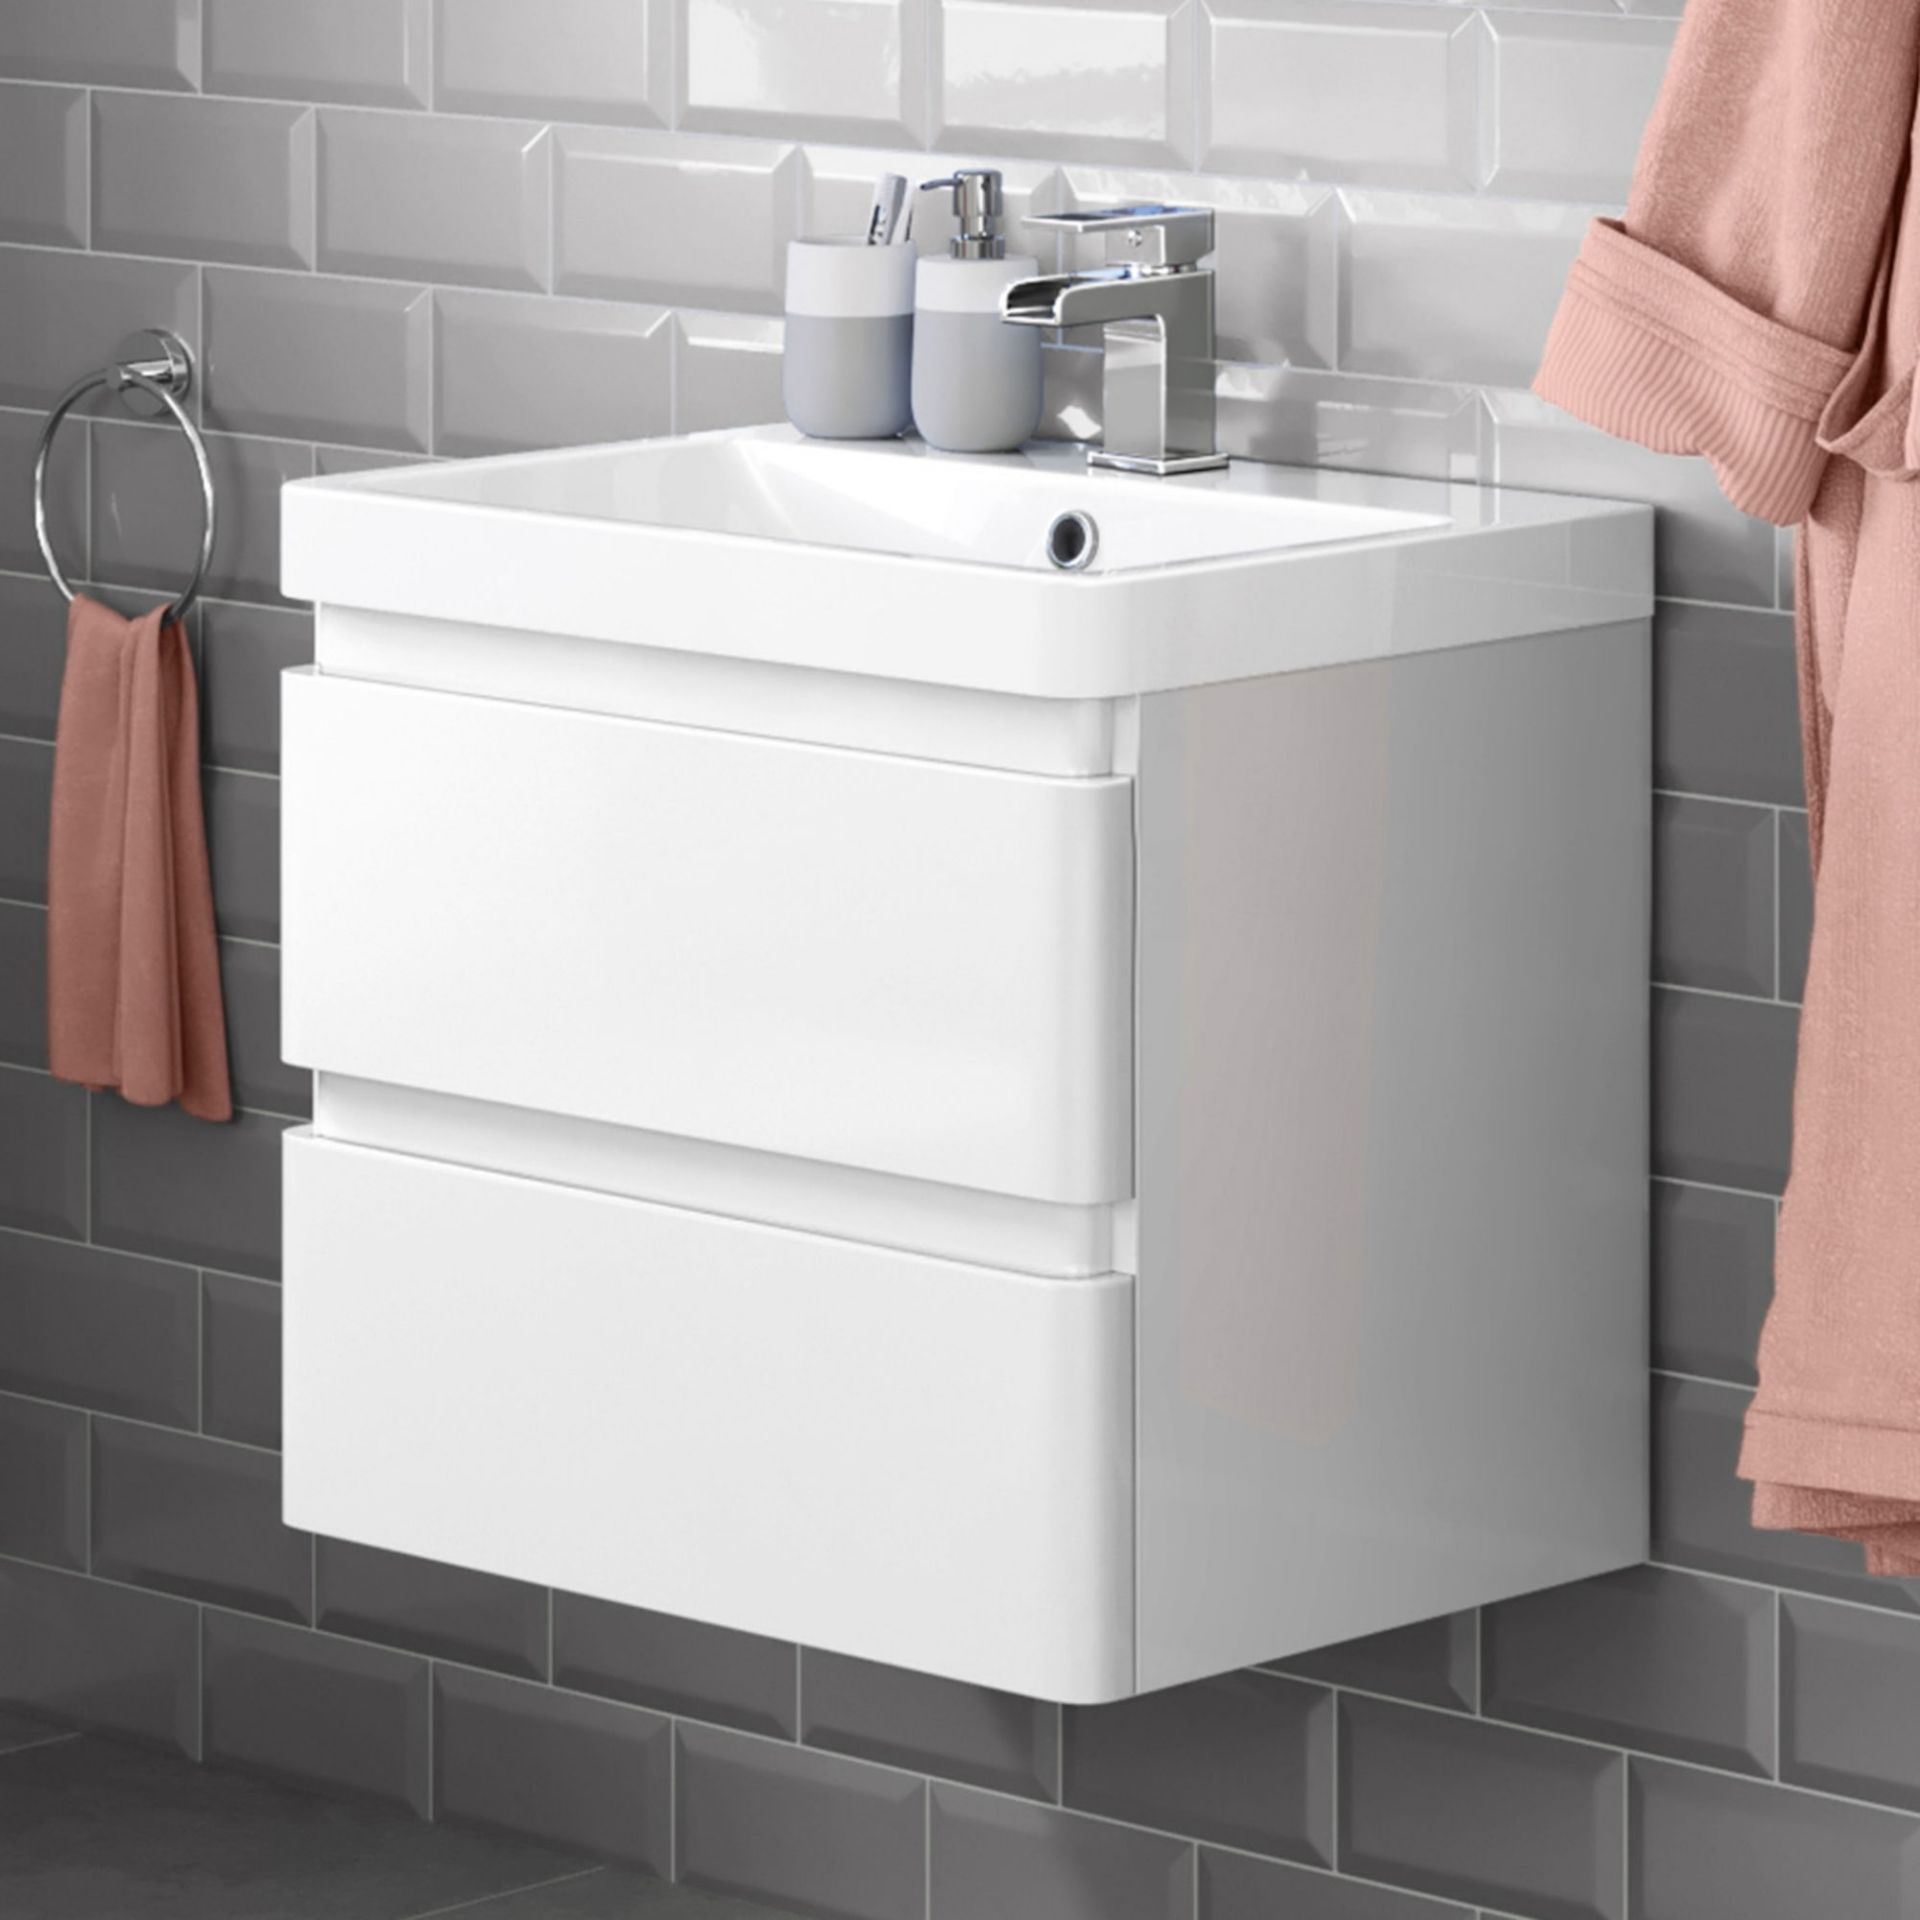 (PC27) 600mm Denver Gloss White Built In Sink Drawer Unit - Wall Hung. RRP £549.99. Comes comp...(